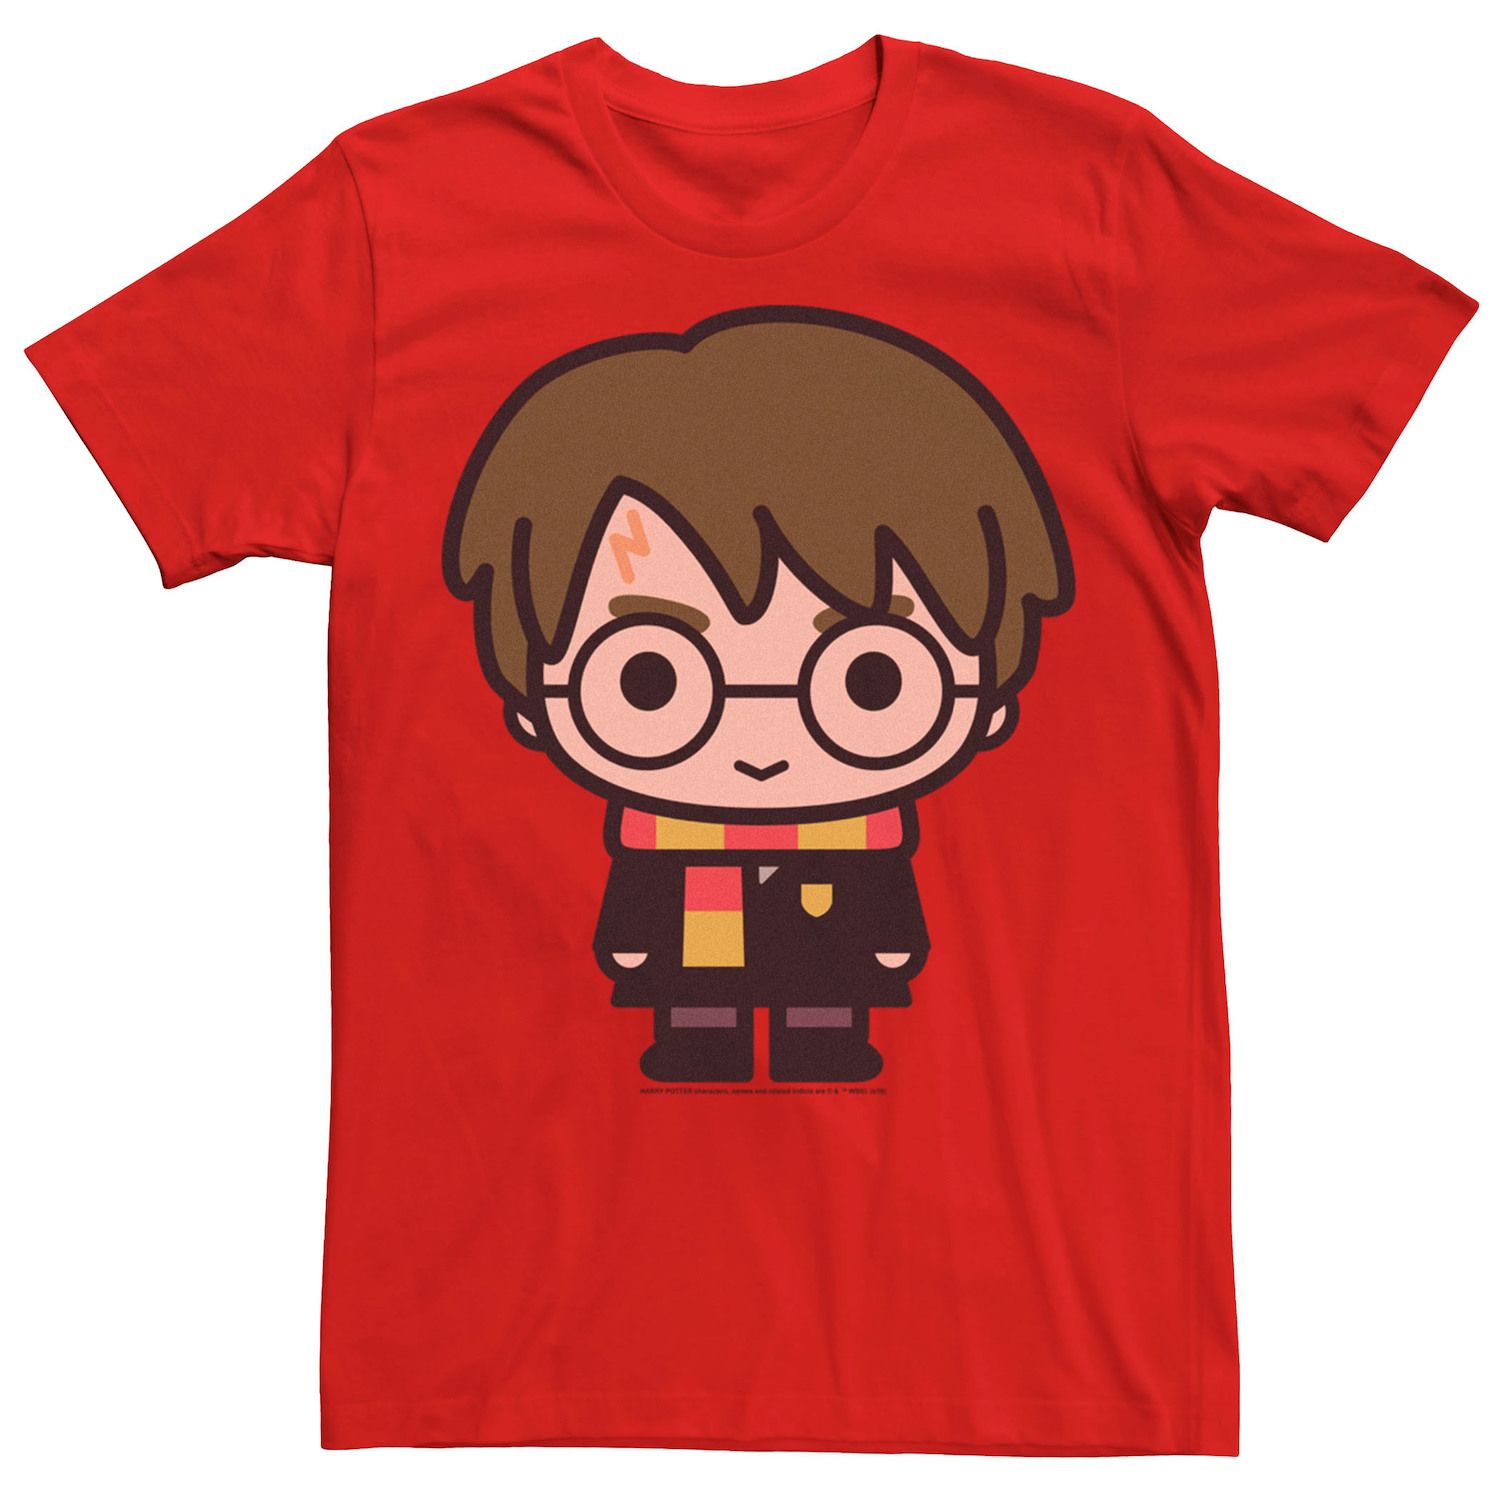 Image for Harry Potter Men's Cute Cartoon Style Portrait Tee at Kohl's.